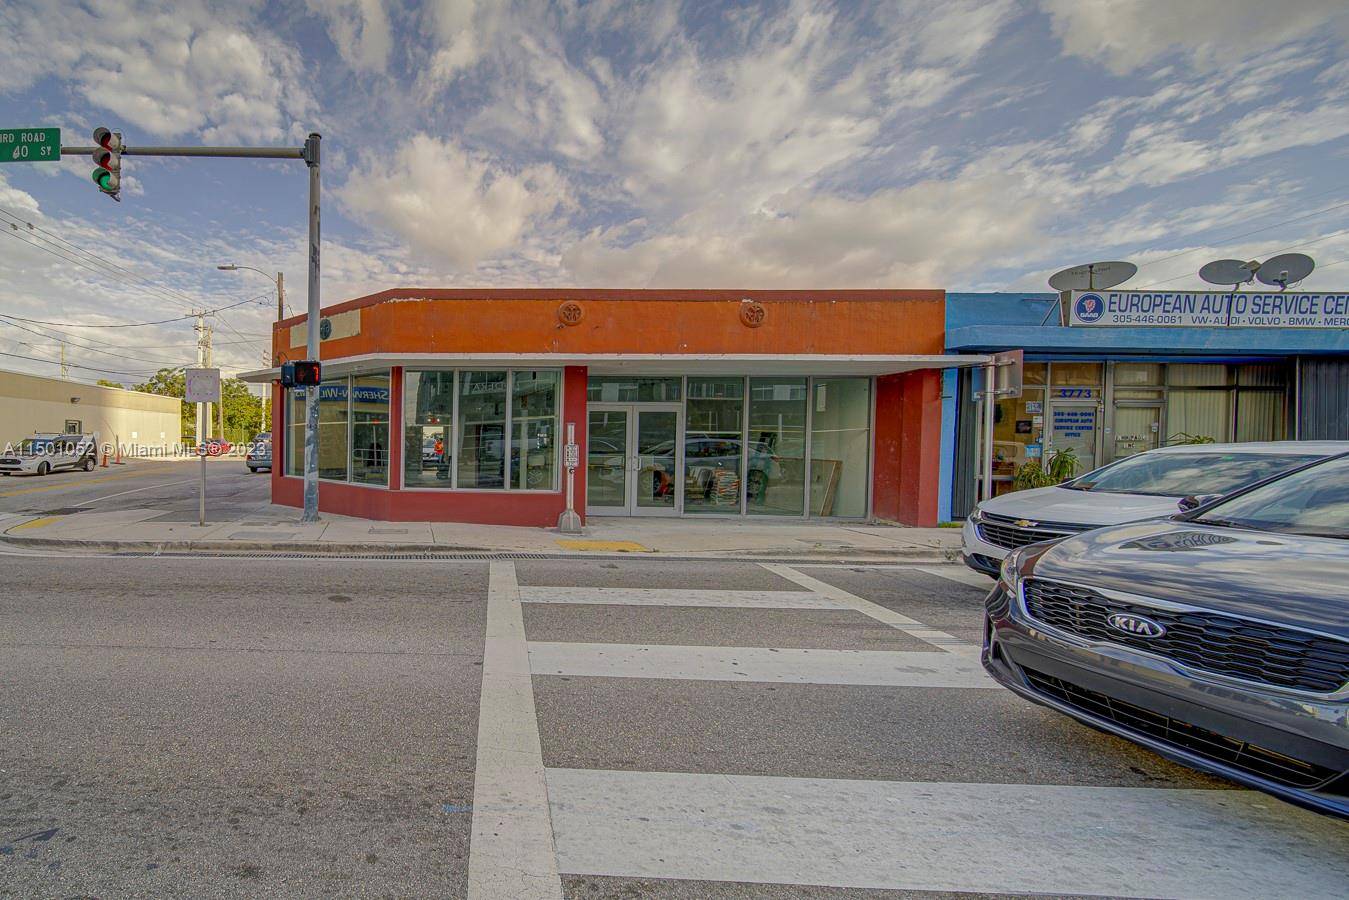 2nd gen restaurant for lease in Miami, FL, located at the busy intersection of Bird Road 39th, just steps away from the City of Coral Gables.